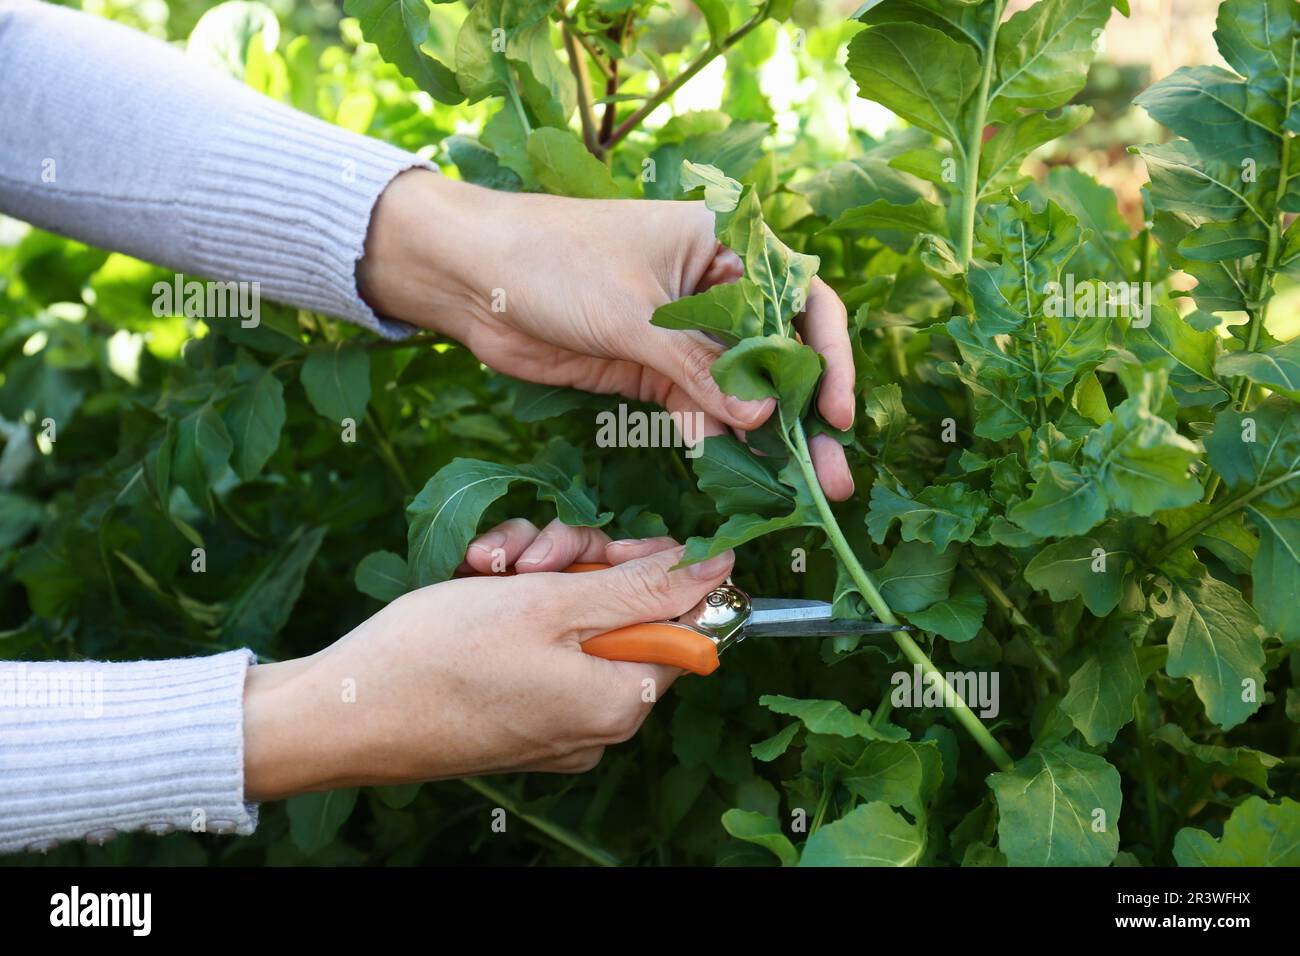 Woman cutting fresh arugula leaves with pruner outdoors, closeup Stock Photo